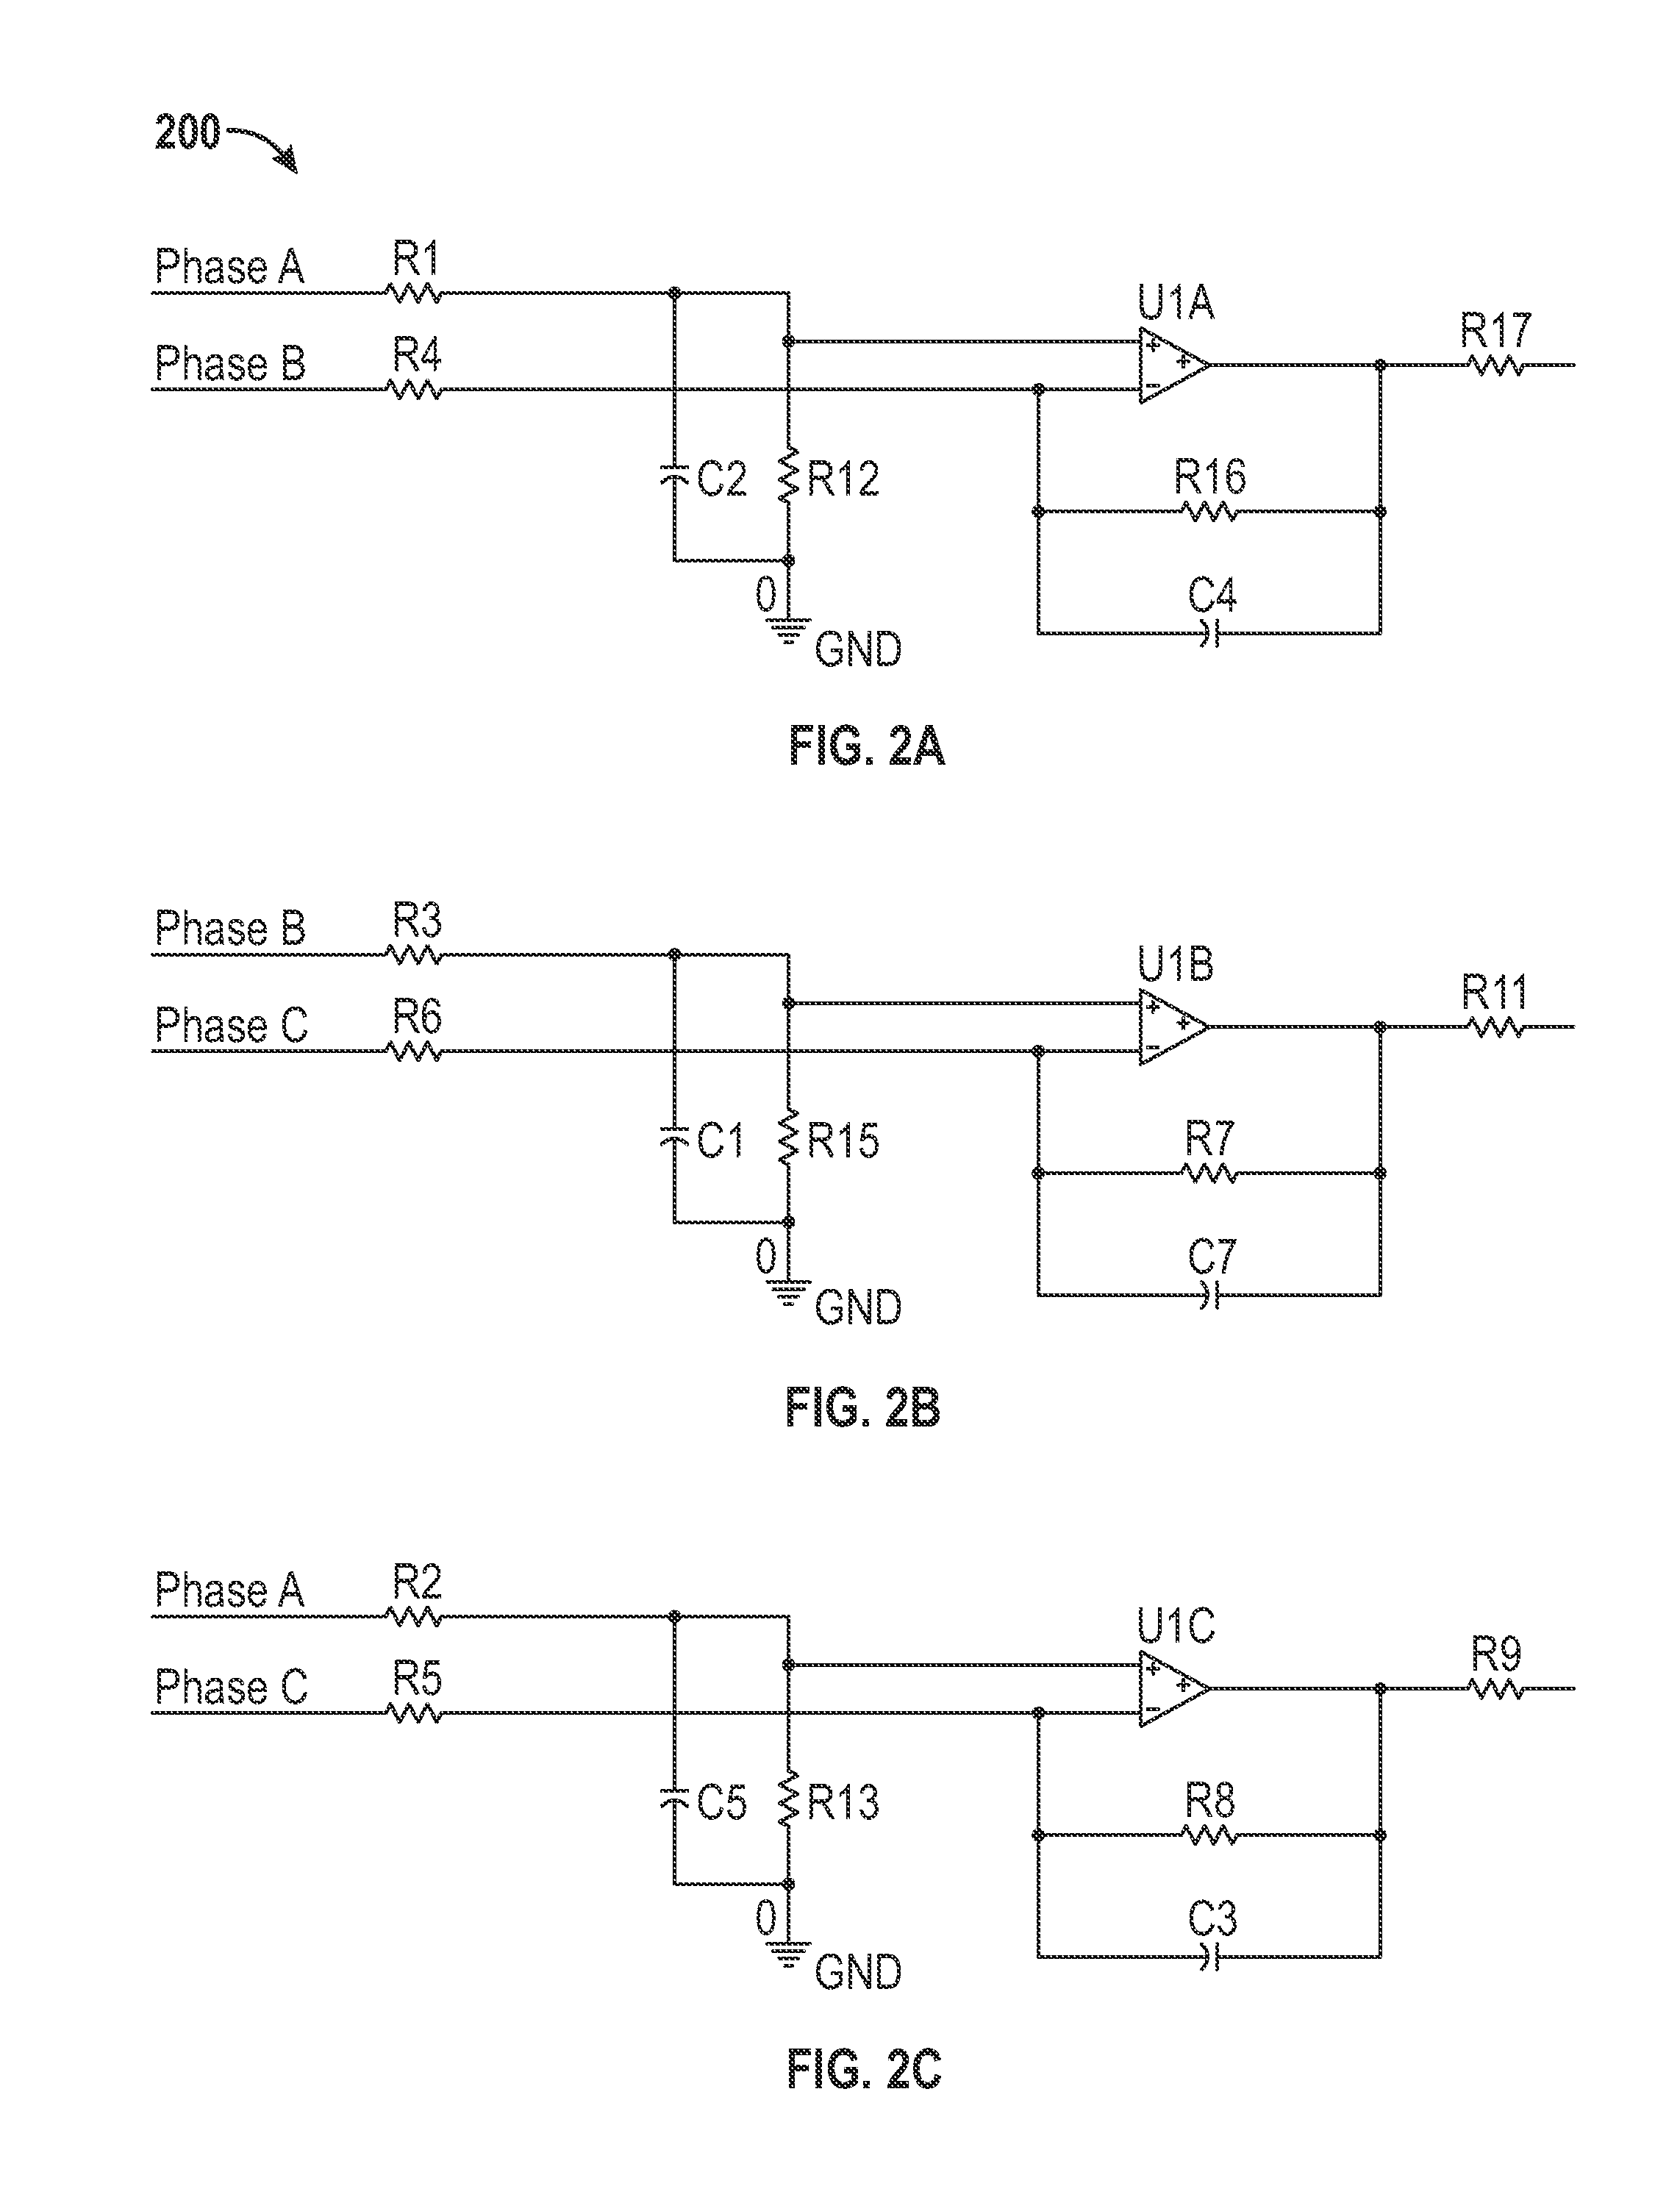 Frequency phase detection three phase system